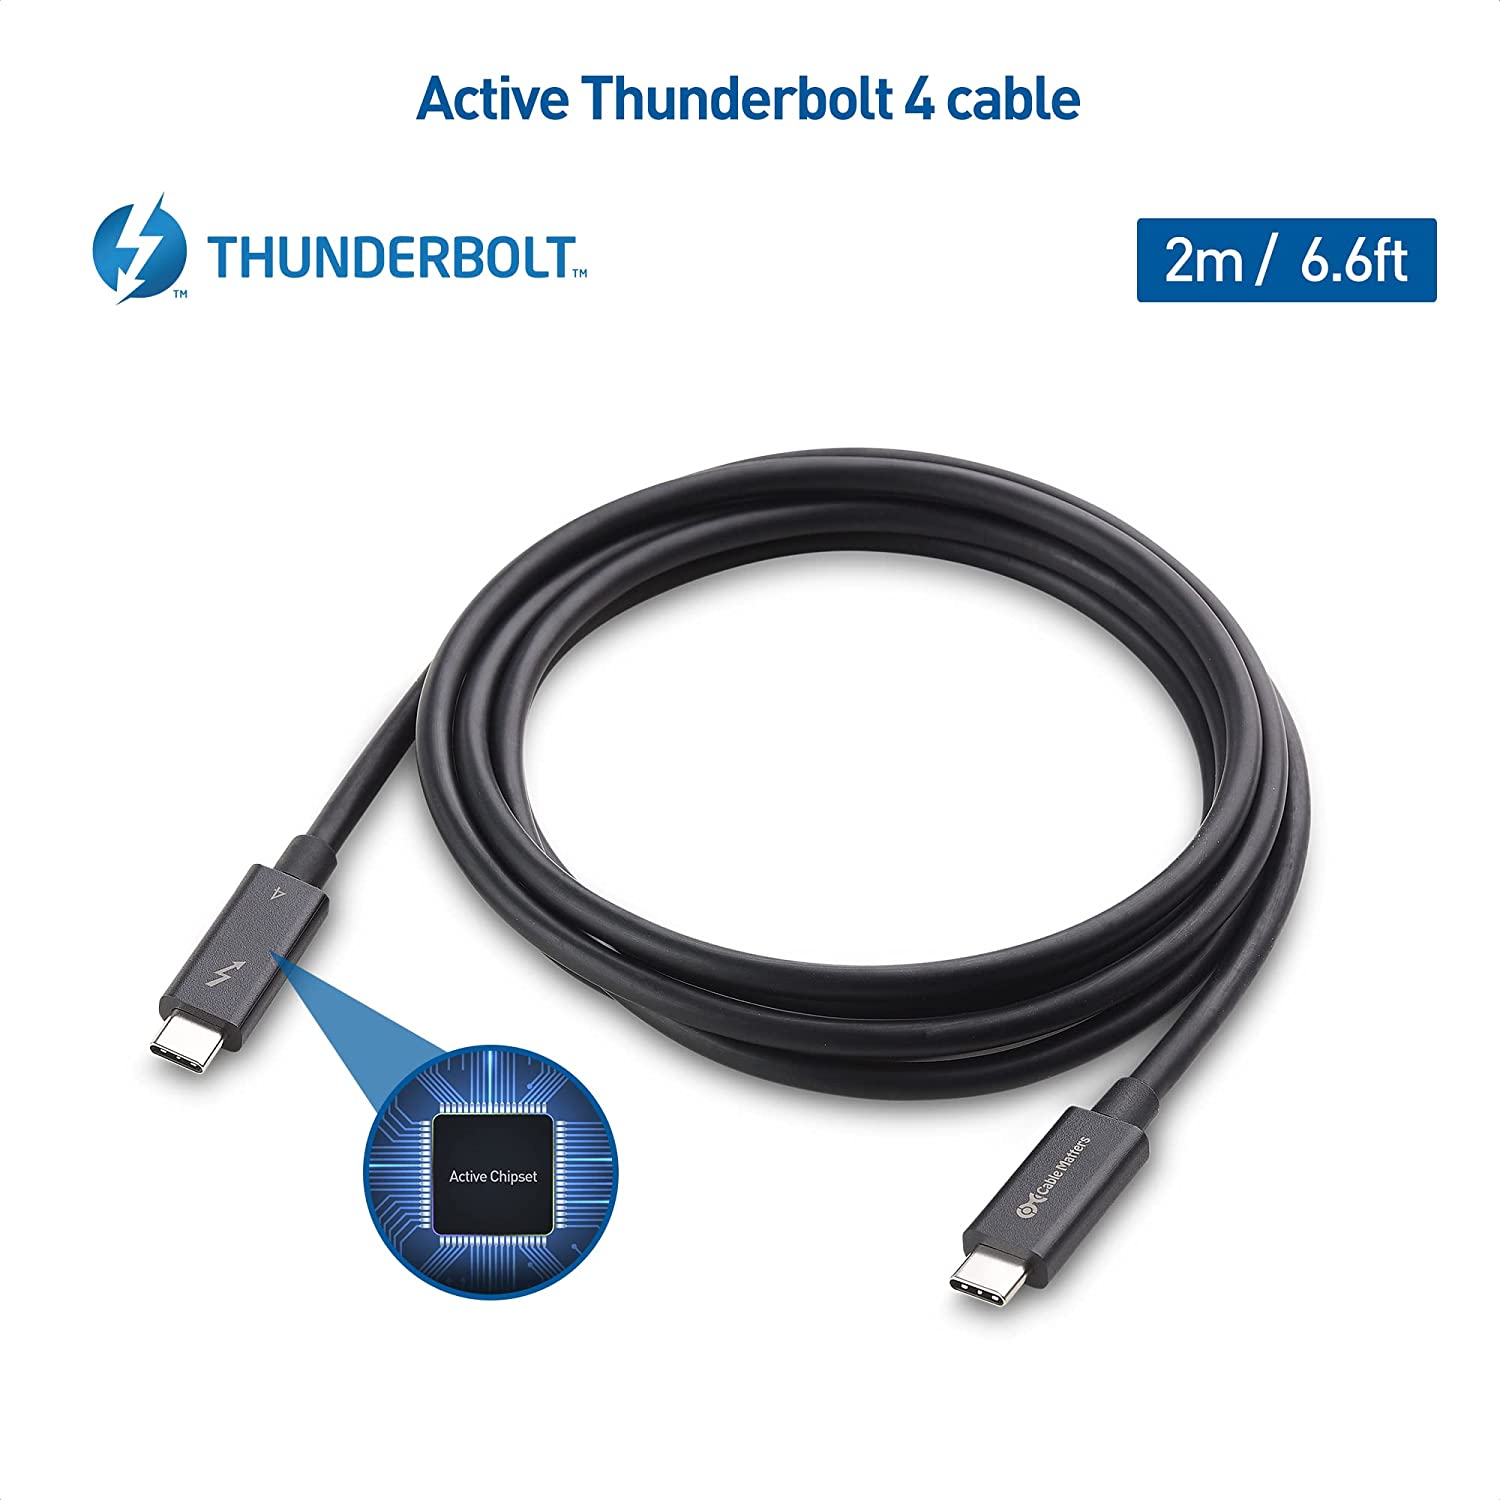 Cable Thunderbolt 4